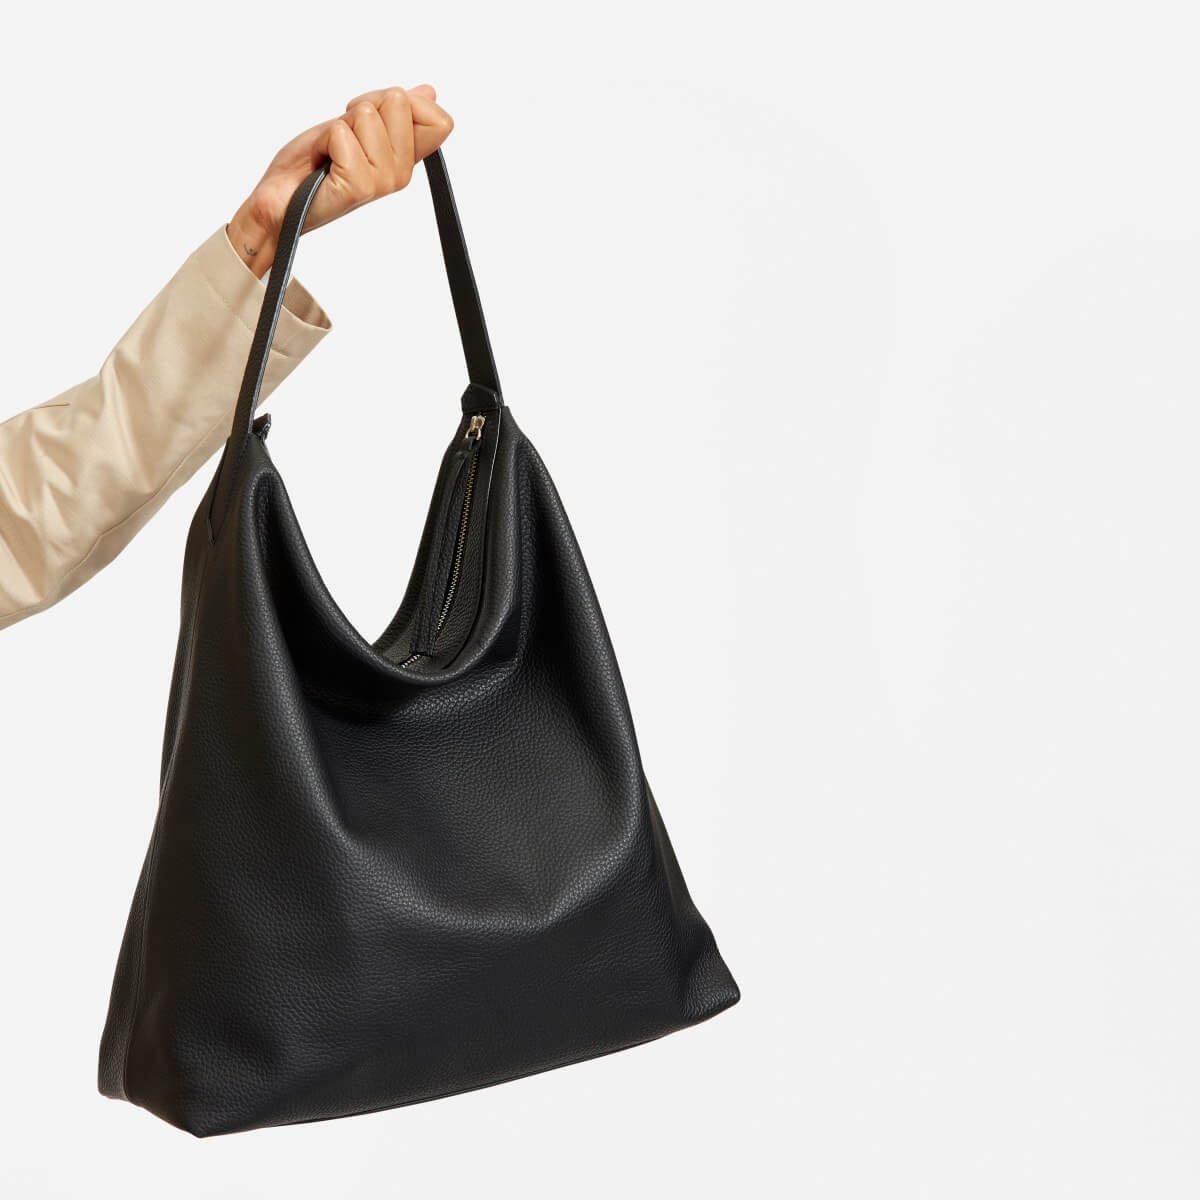 Everlane Market Tote VS Madewell Transport Tote–Which is Right for You? –  Jess Keys